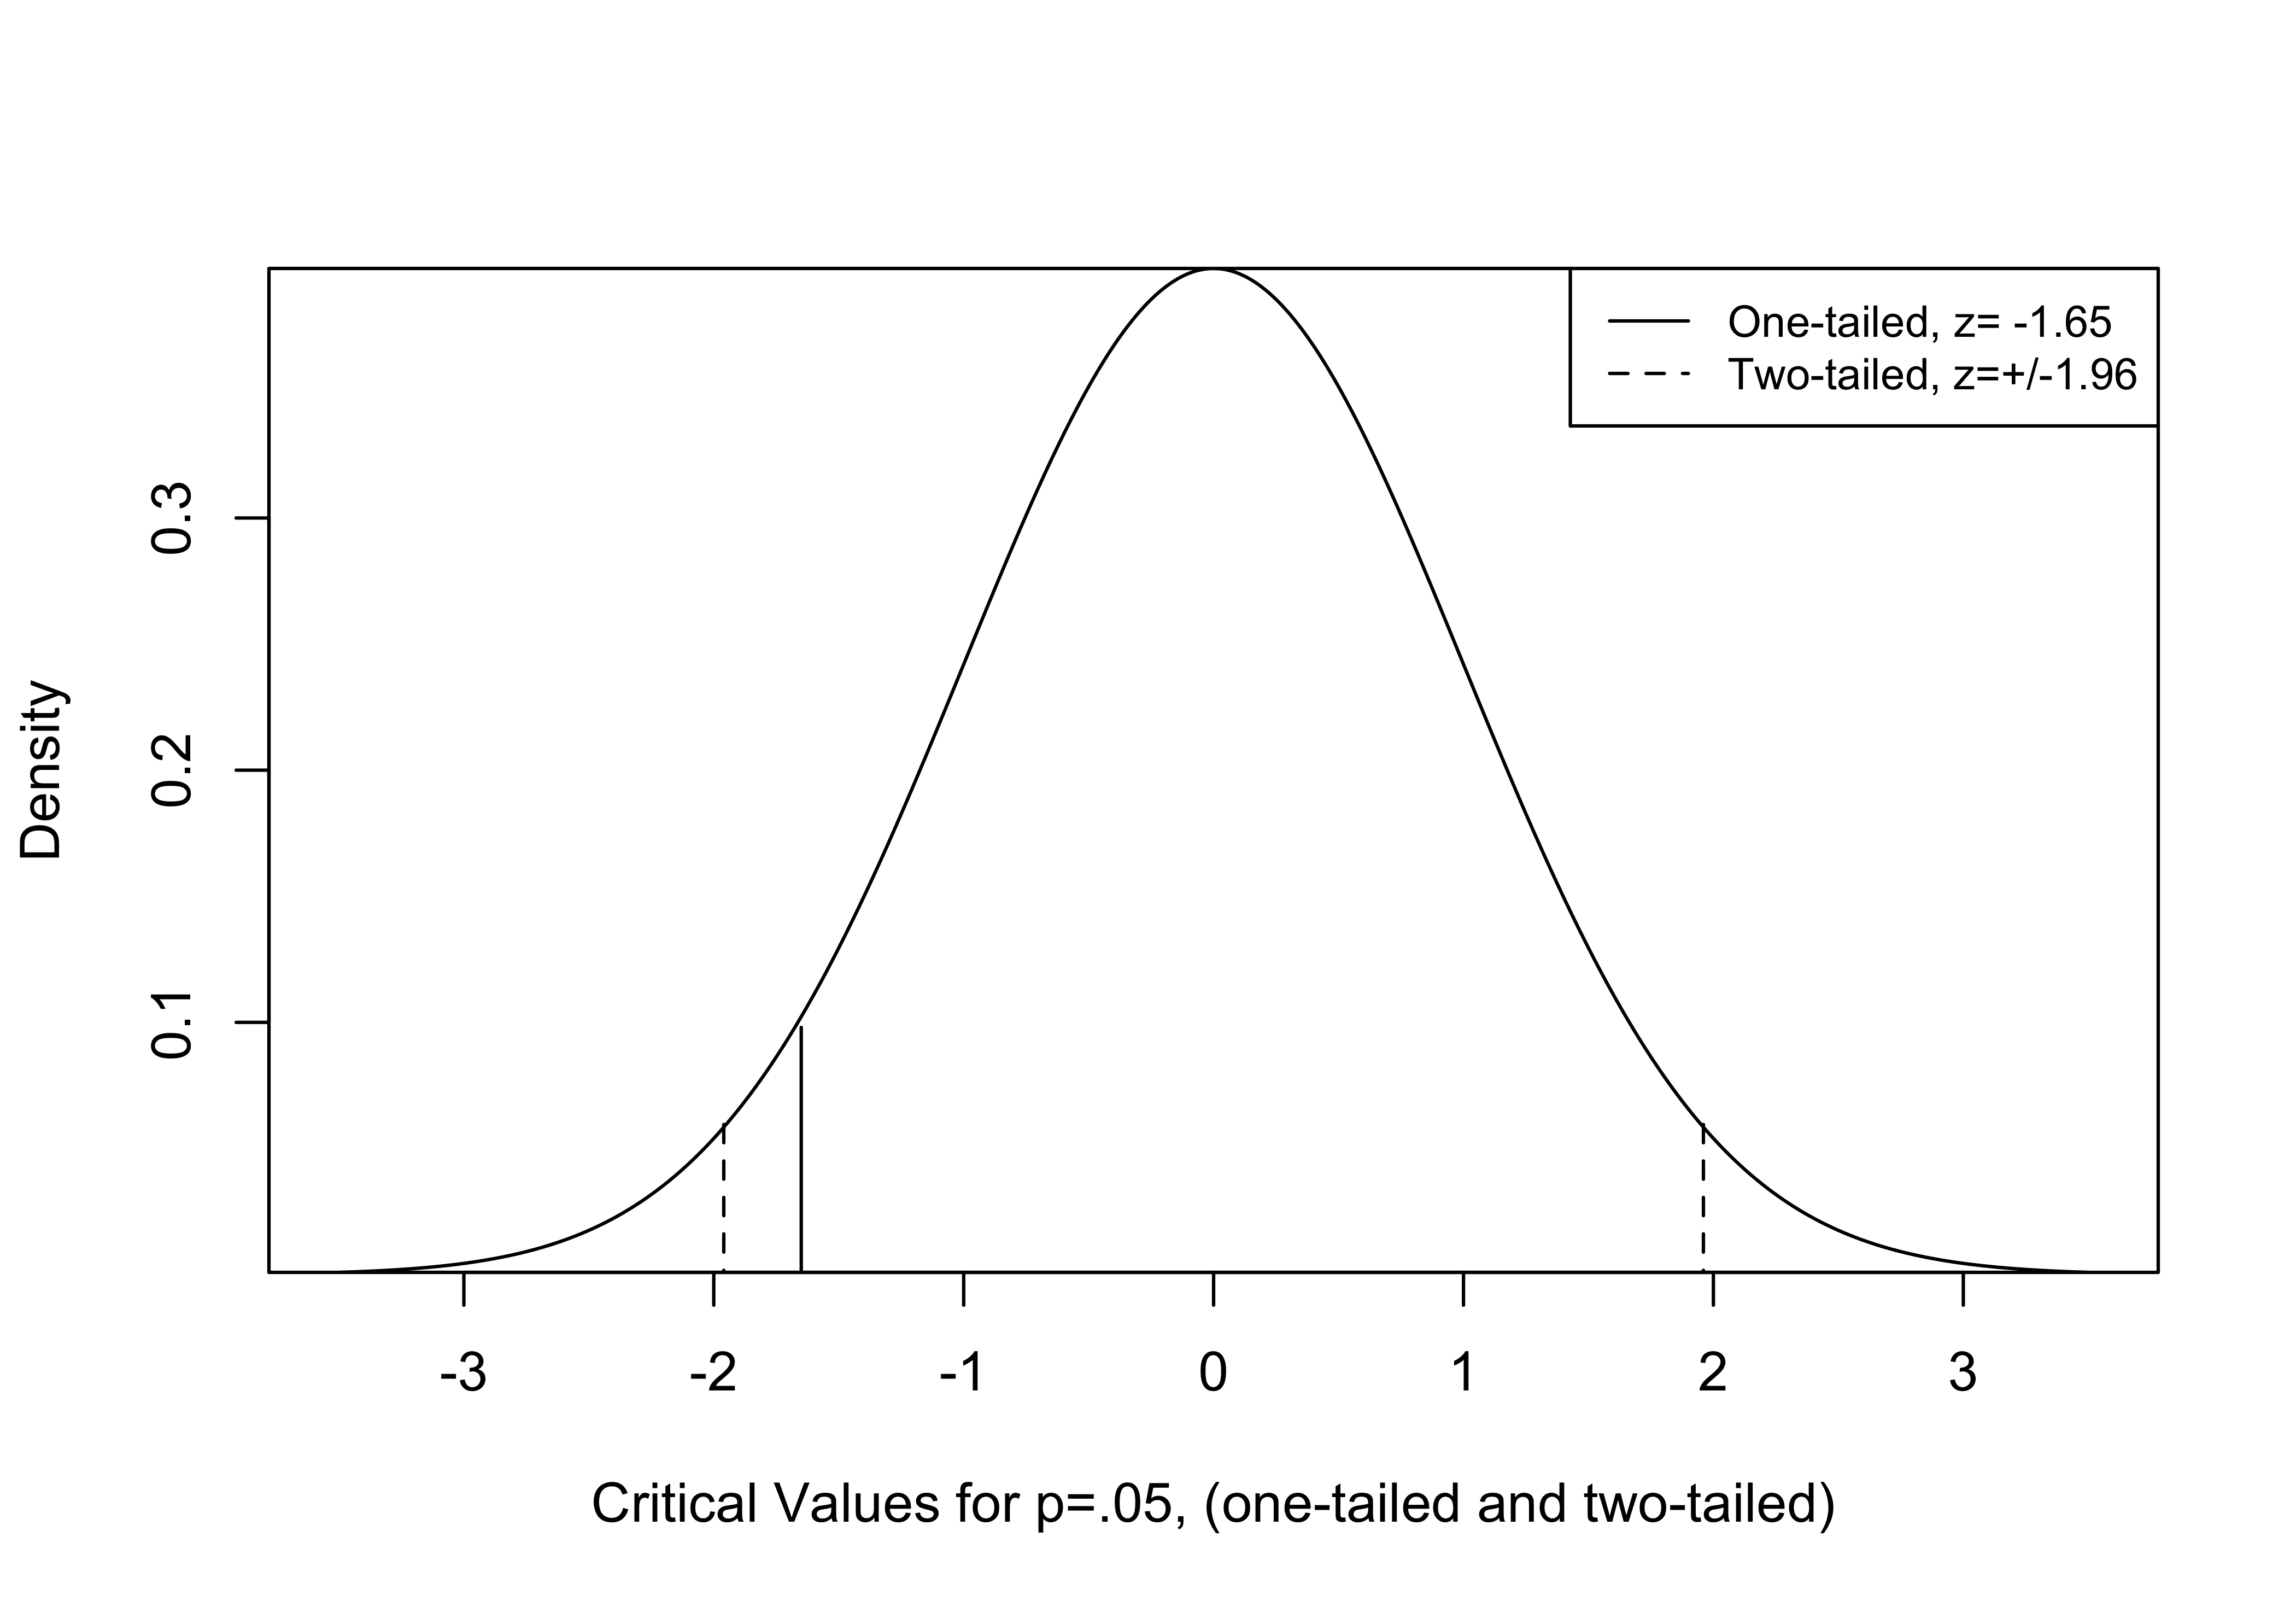 Critical Values for One and Two-tailed Tests